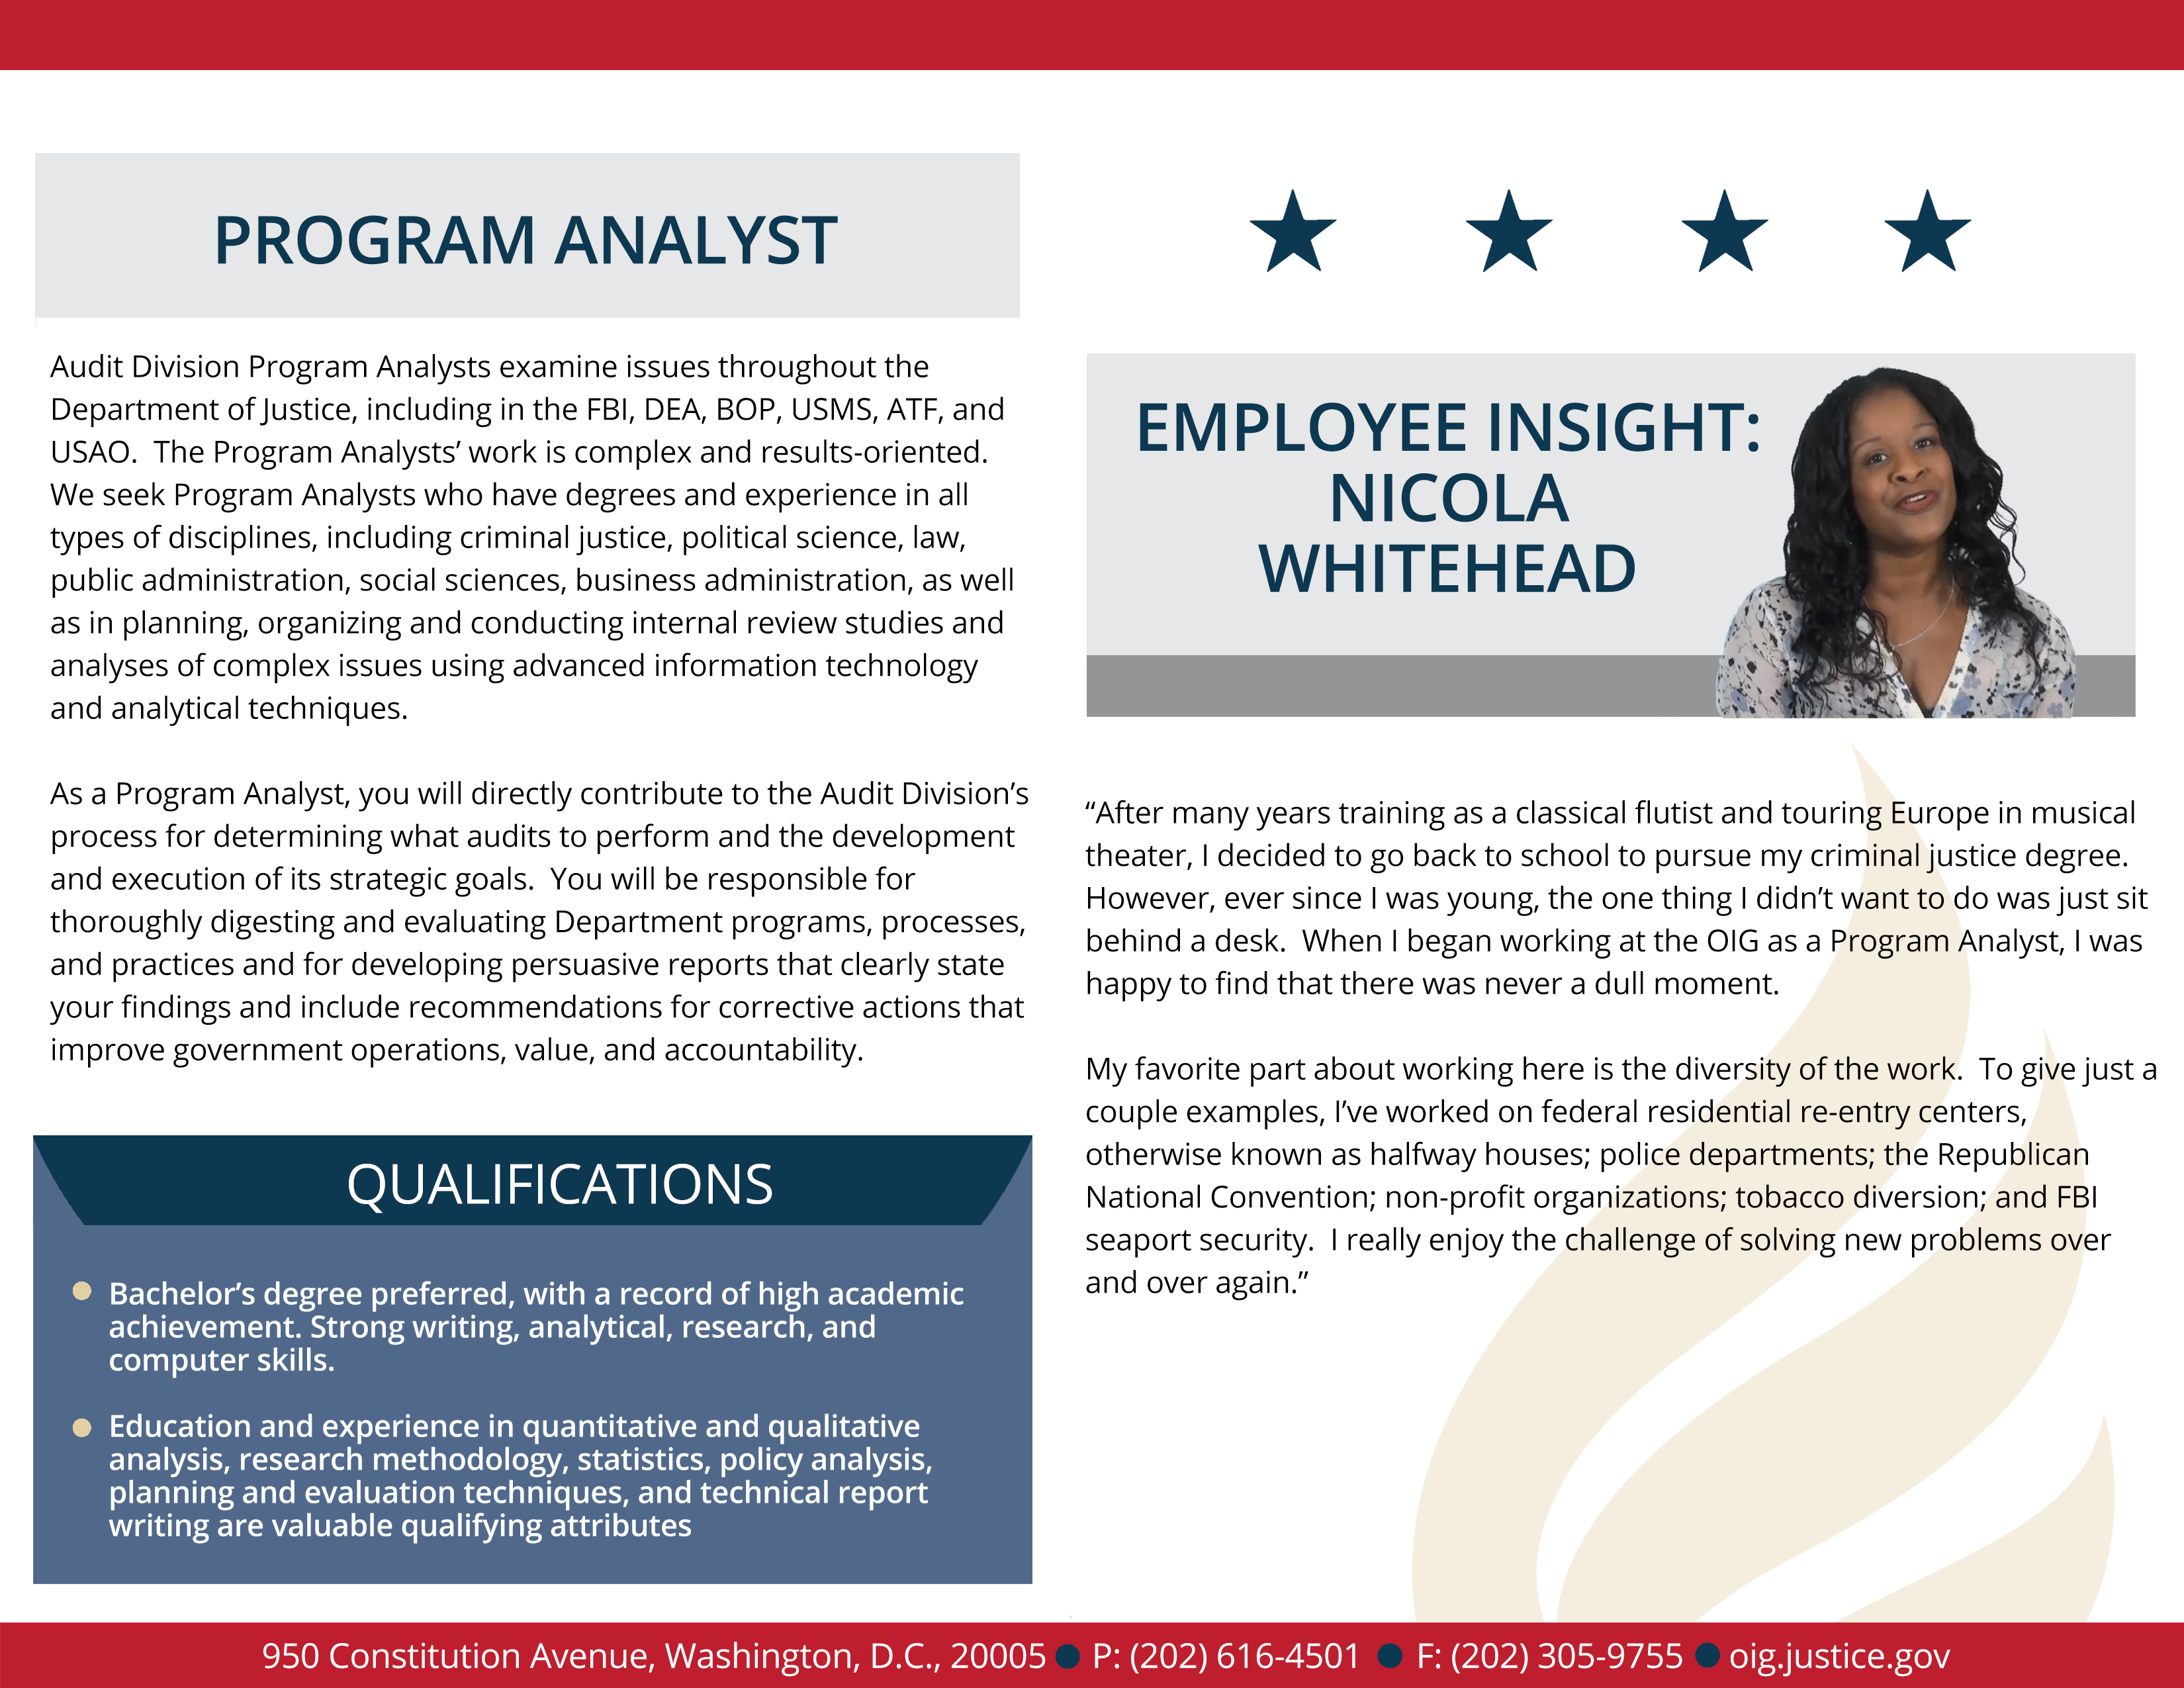 Learn more about the analysts employee experience